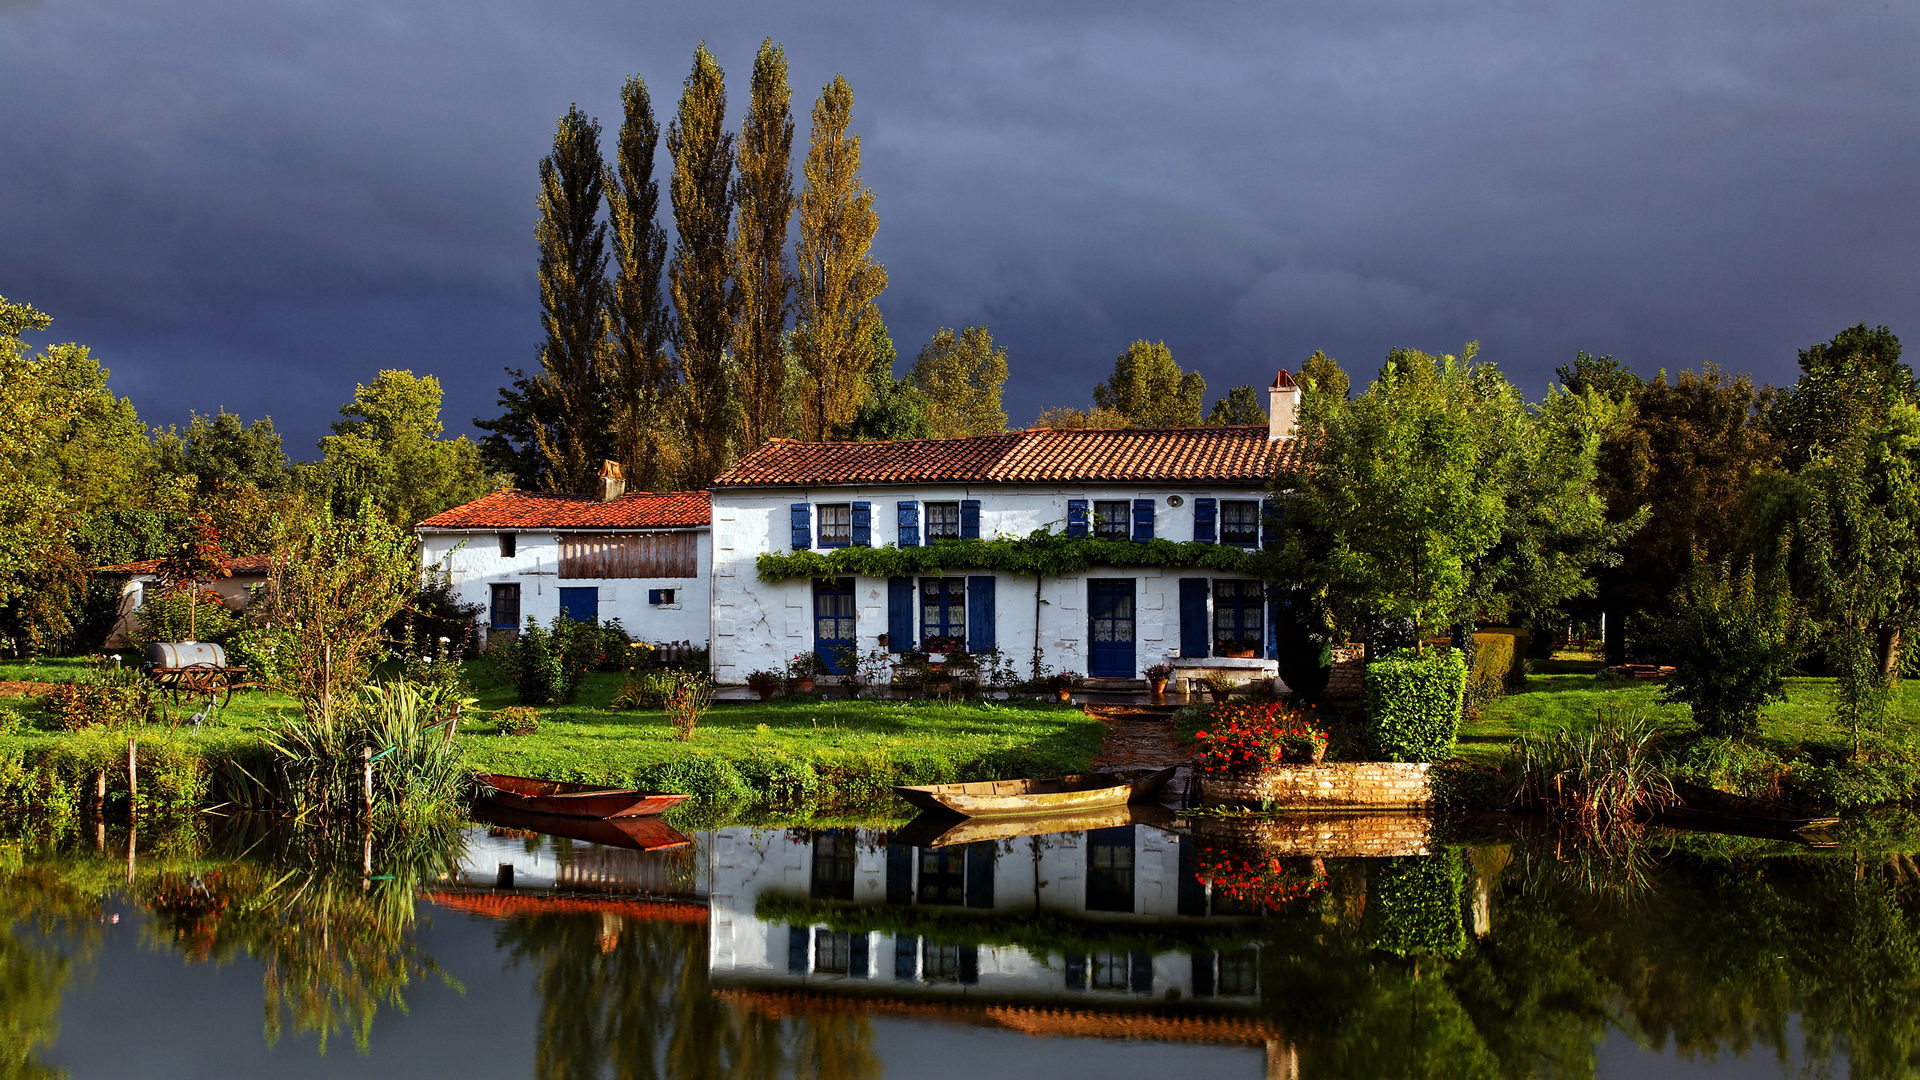 landscape, lake, bush, grass, old, man made, house, boat, building, garden, mansion, photography, reflection, sky, tree, water